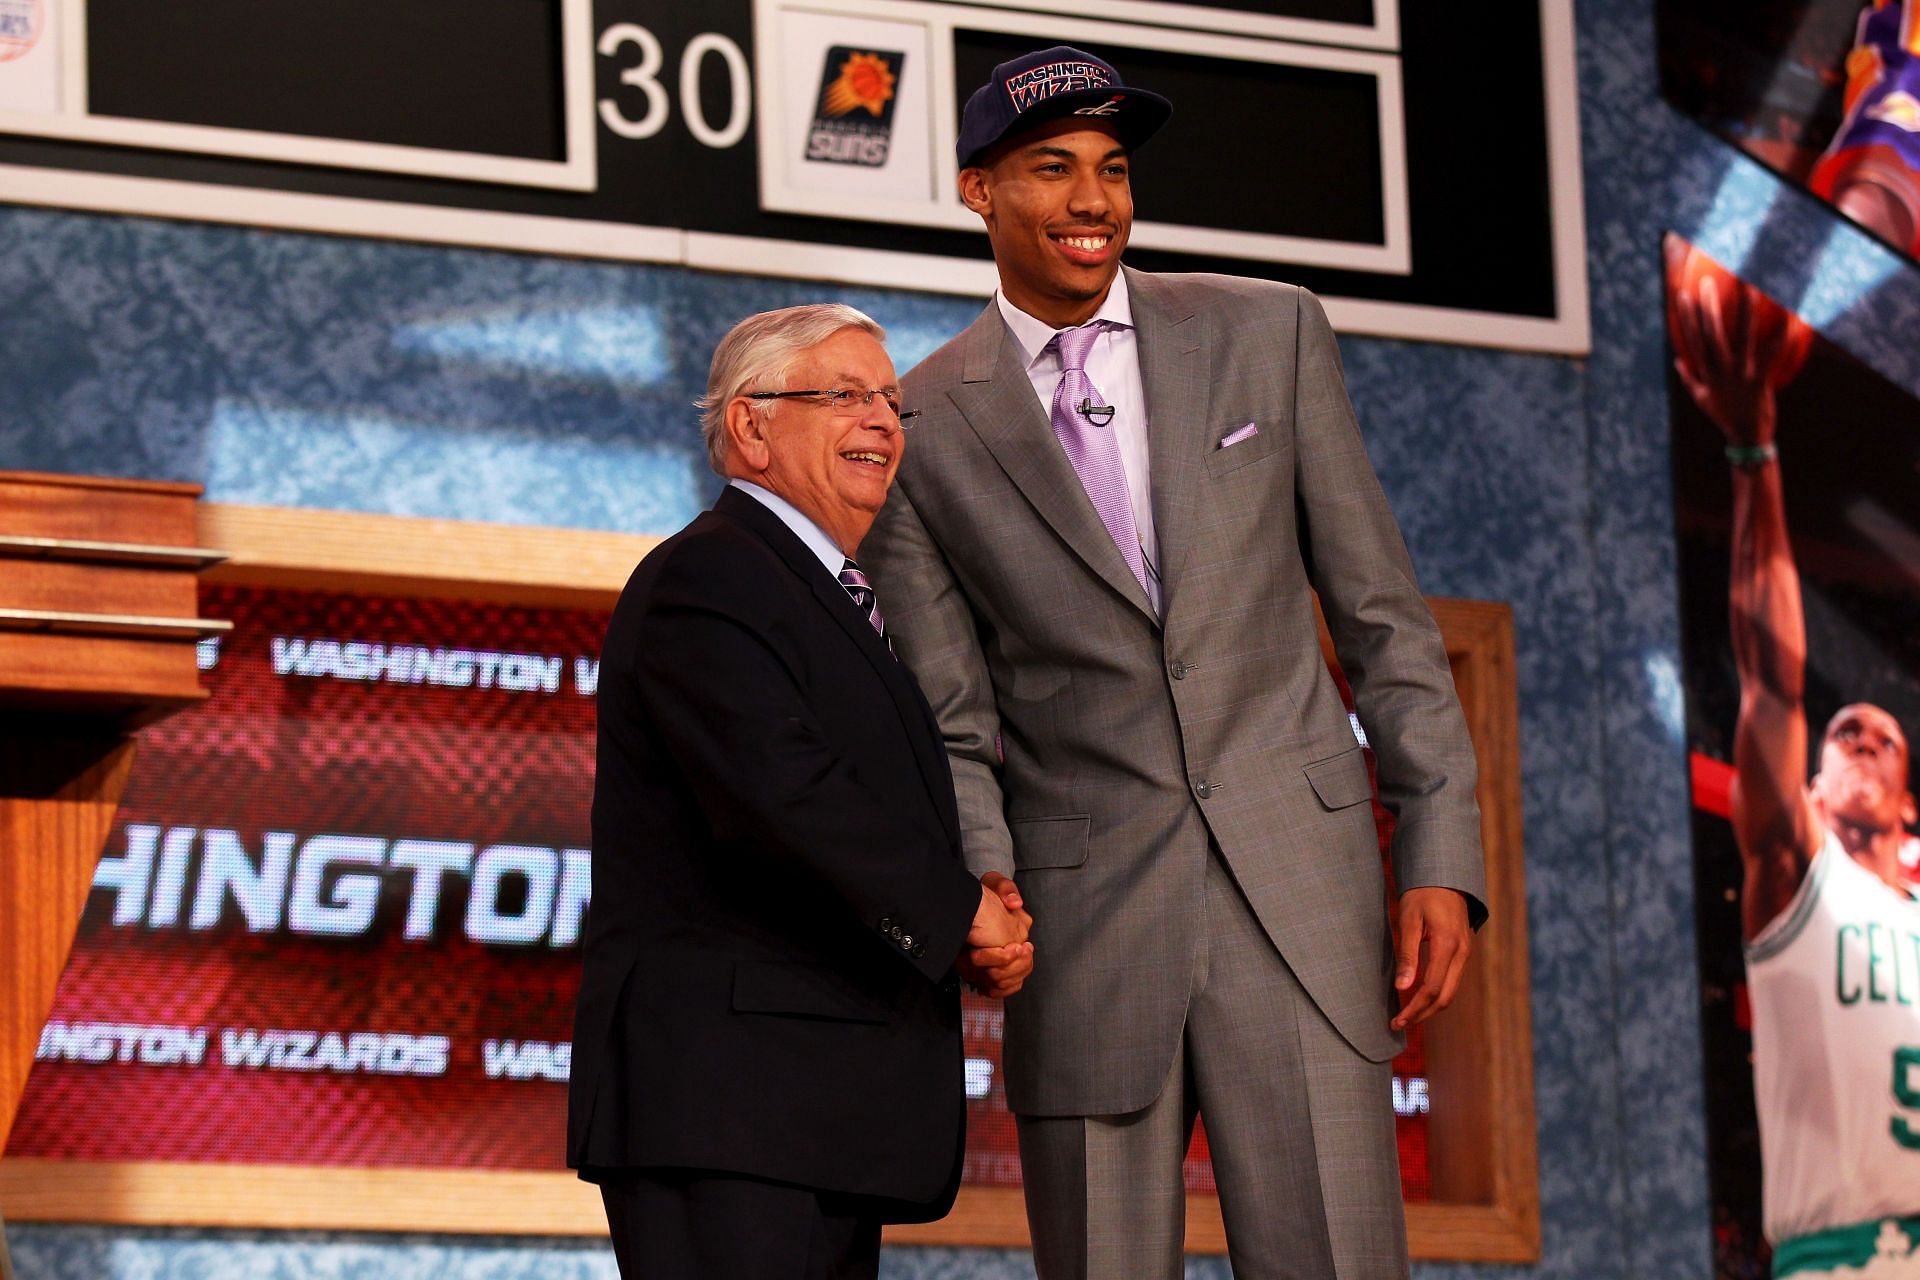 David Stern was the previous NBA commissioner (Image via Getty Images)